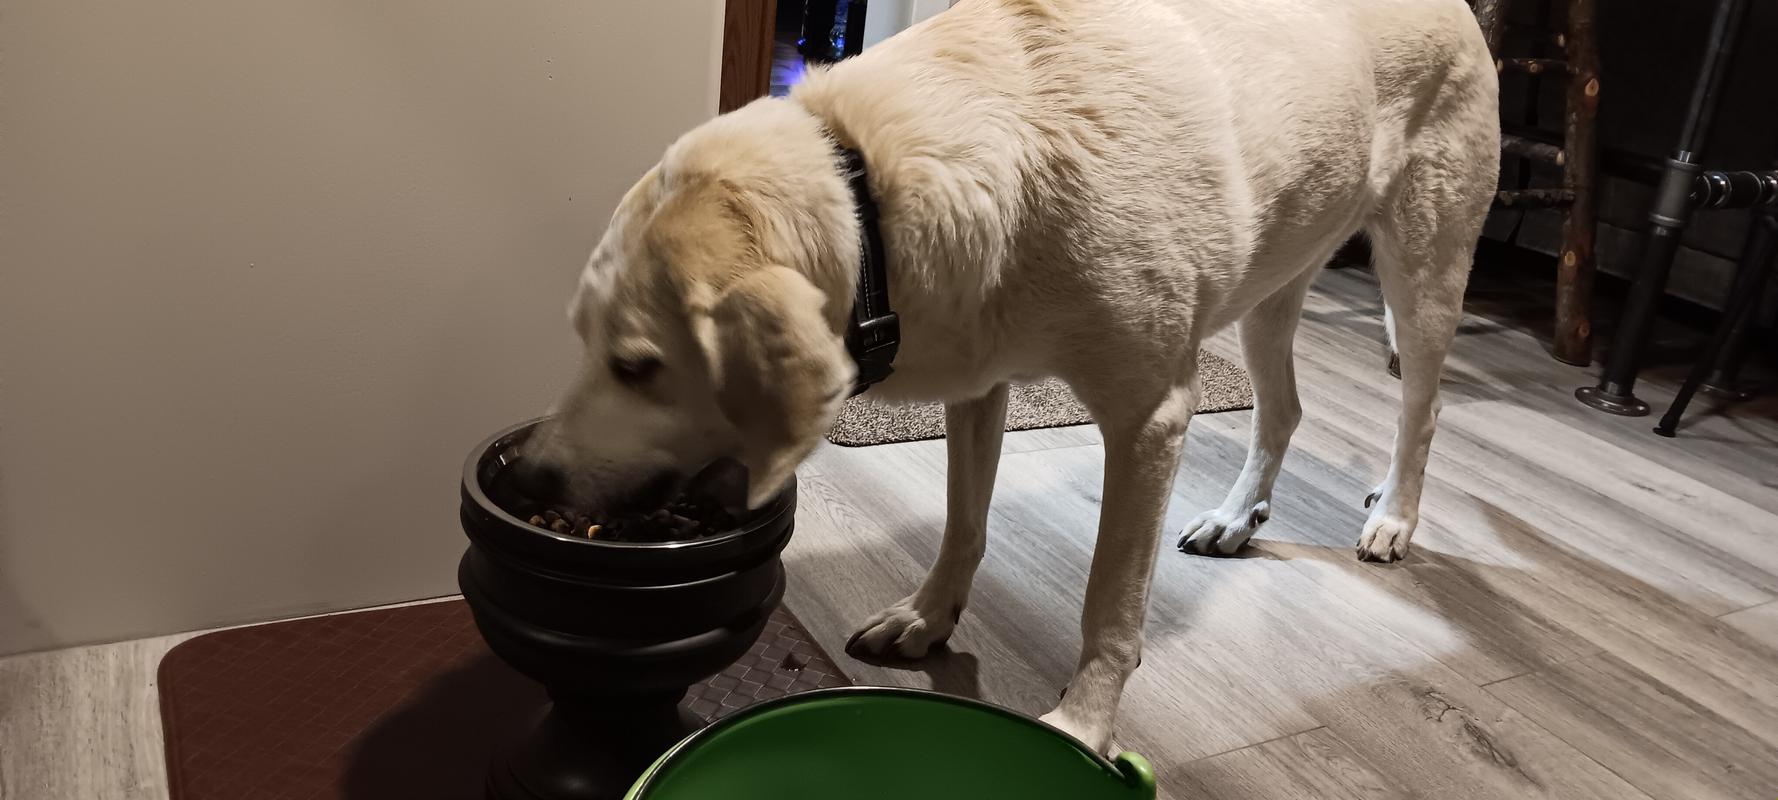 How tall should my elevated dog bowl be? – Pet Junkie